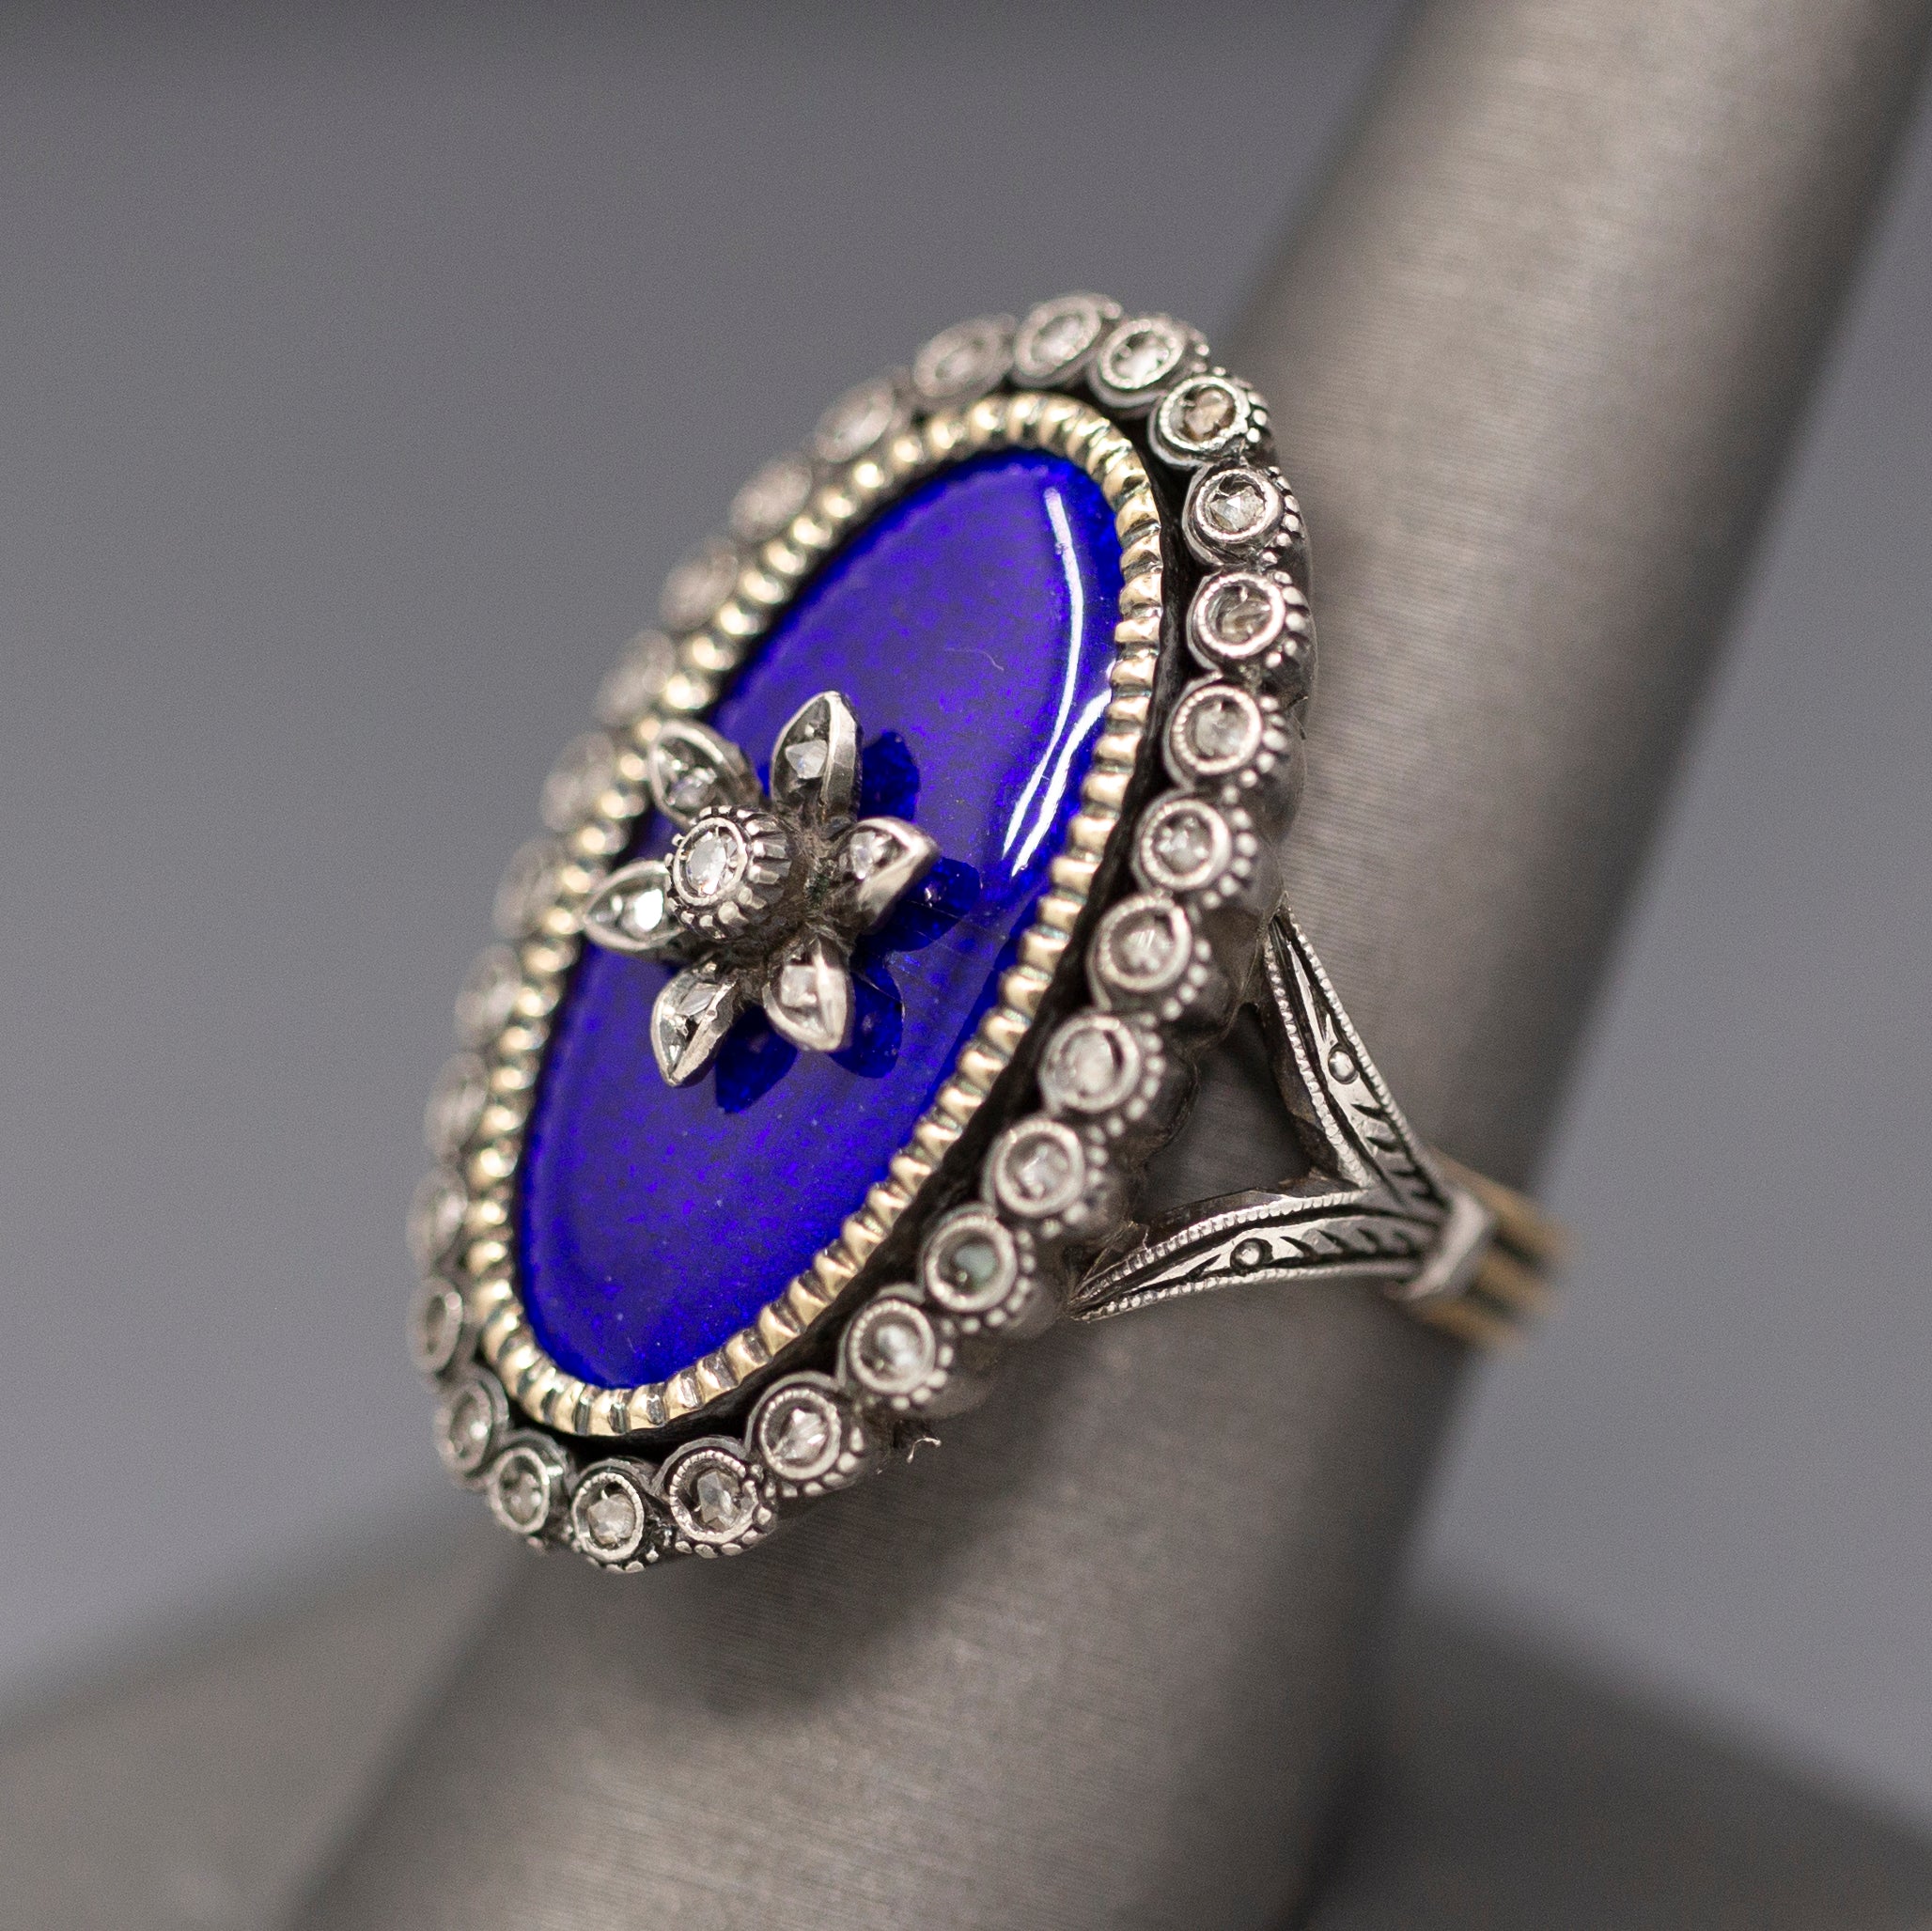 Exquisite Georgian Revival 1920s Blue Enamel and Rose Cut Diamond Ring in Silver and 14k Yellow Gold